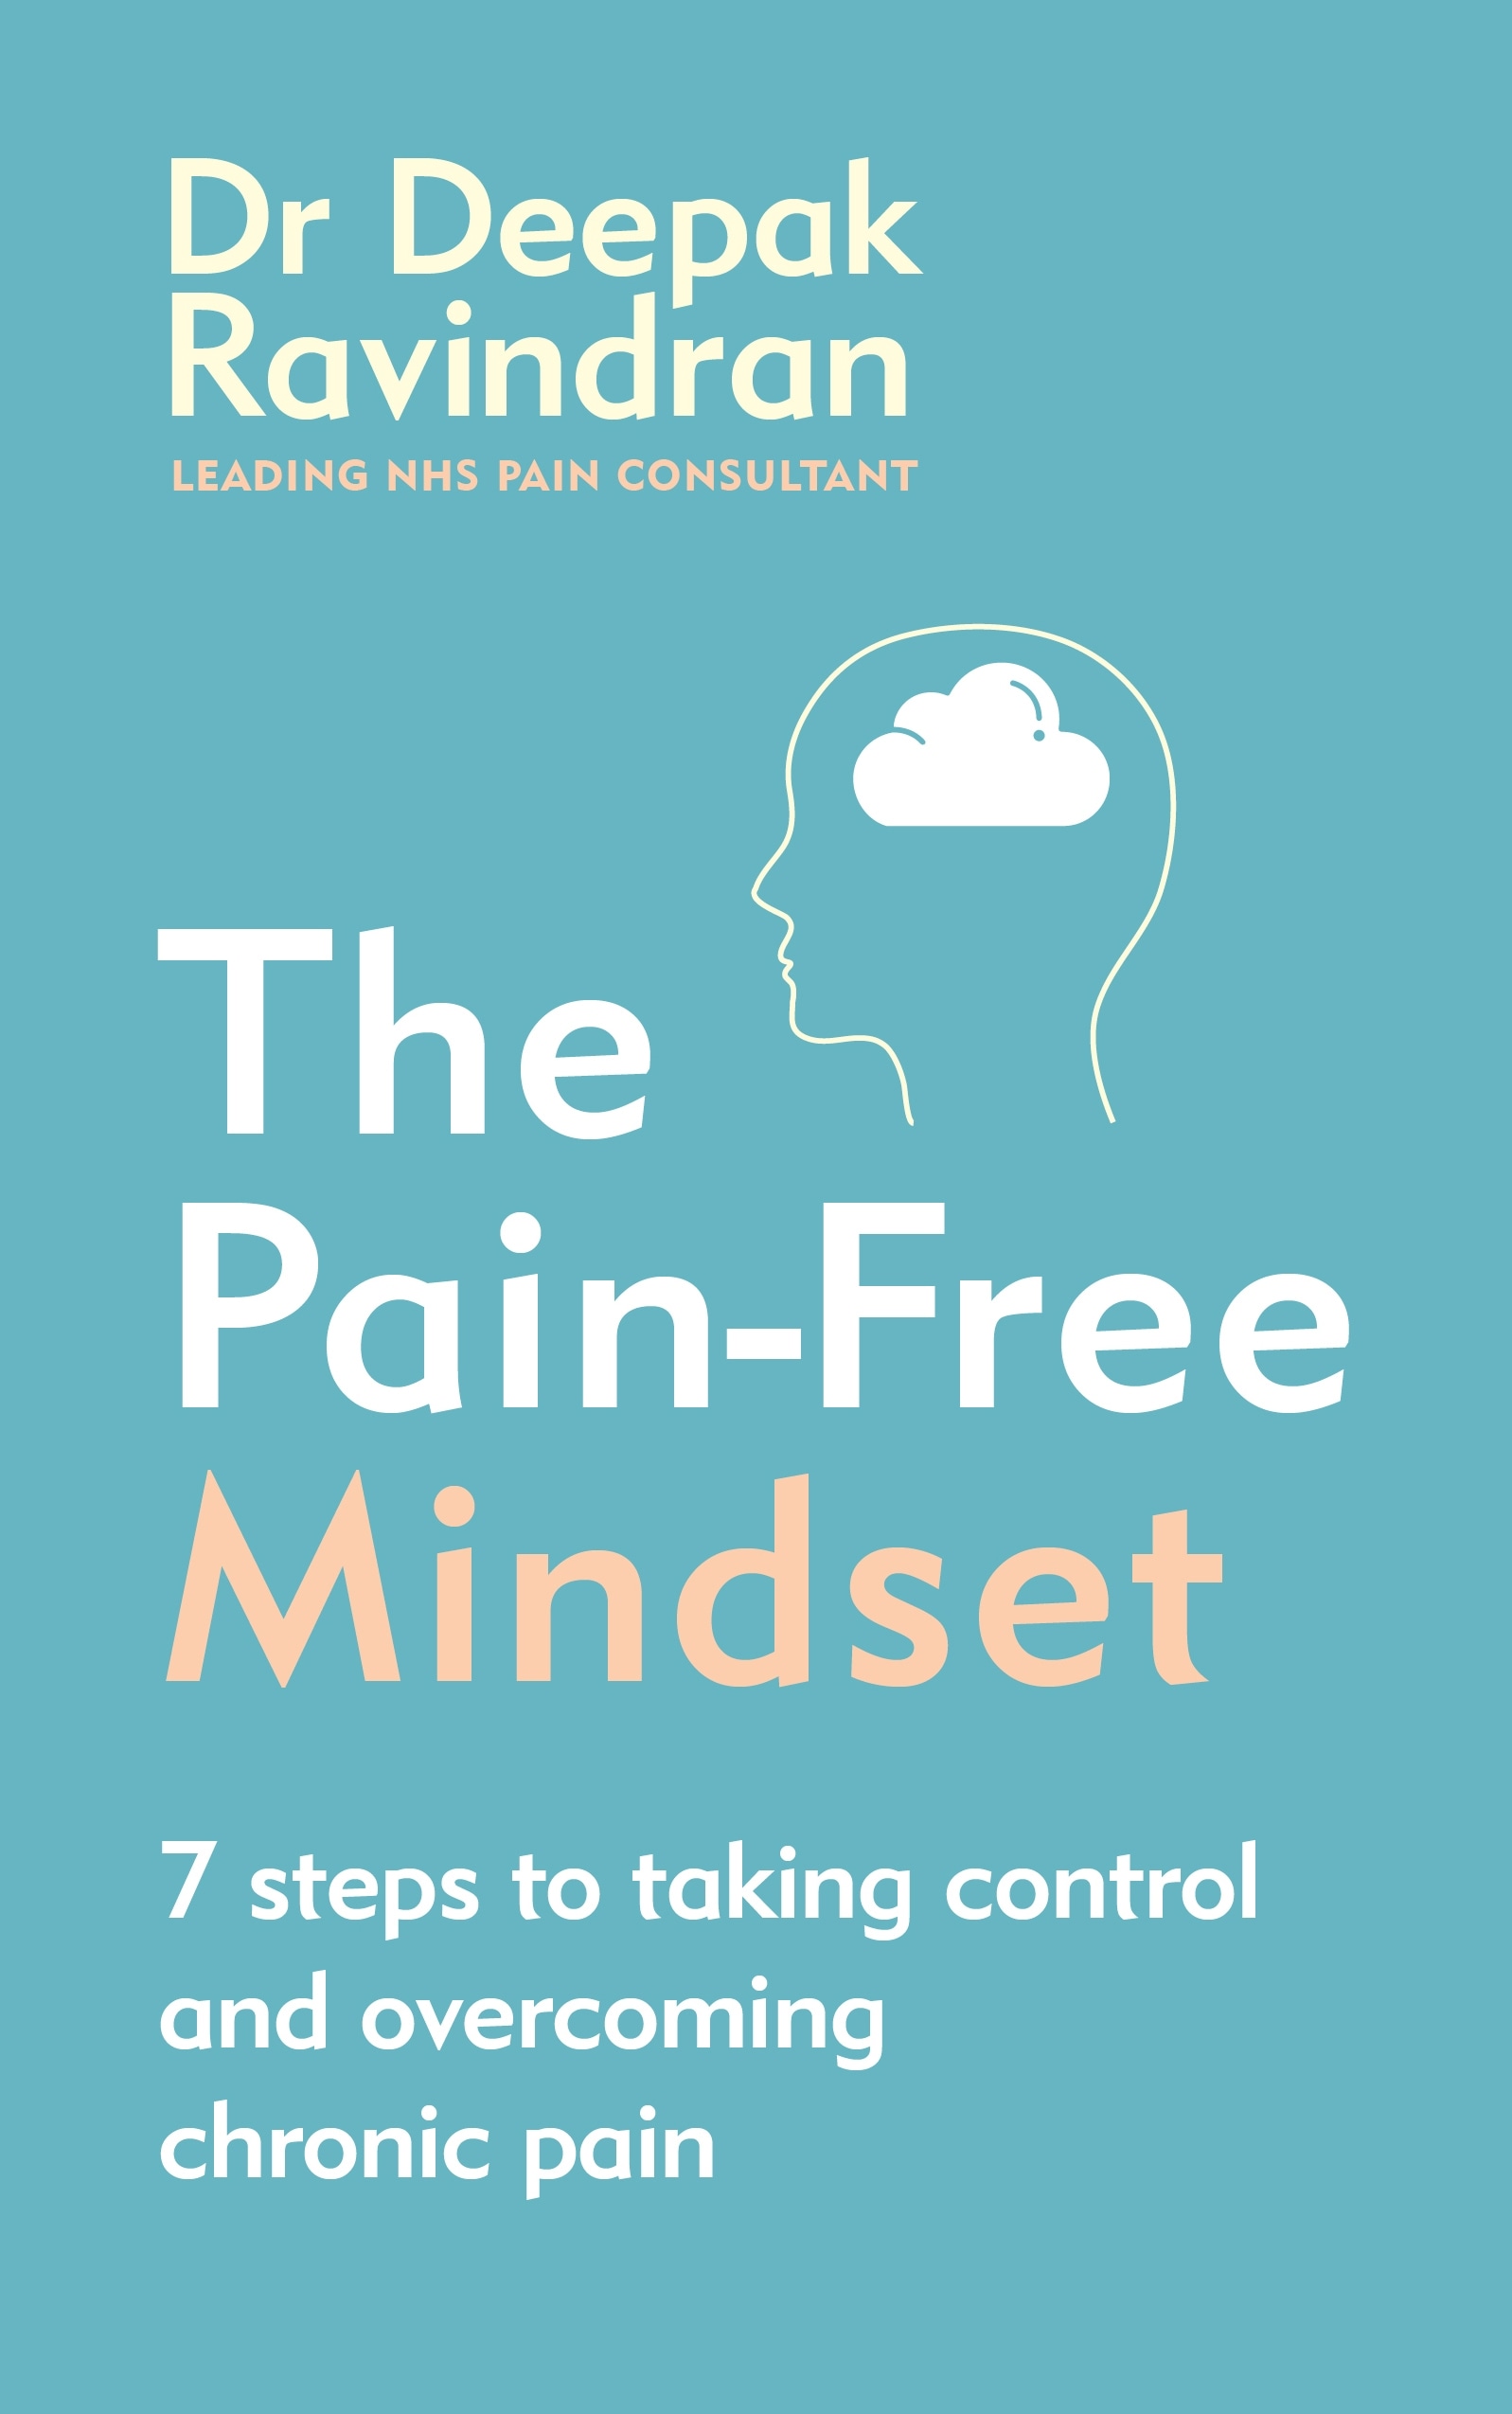 Book “The Pain-Free Mindset” by Dr Deepak Ravindran — March 4, 2021